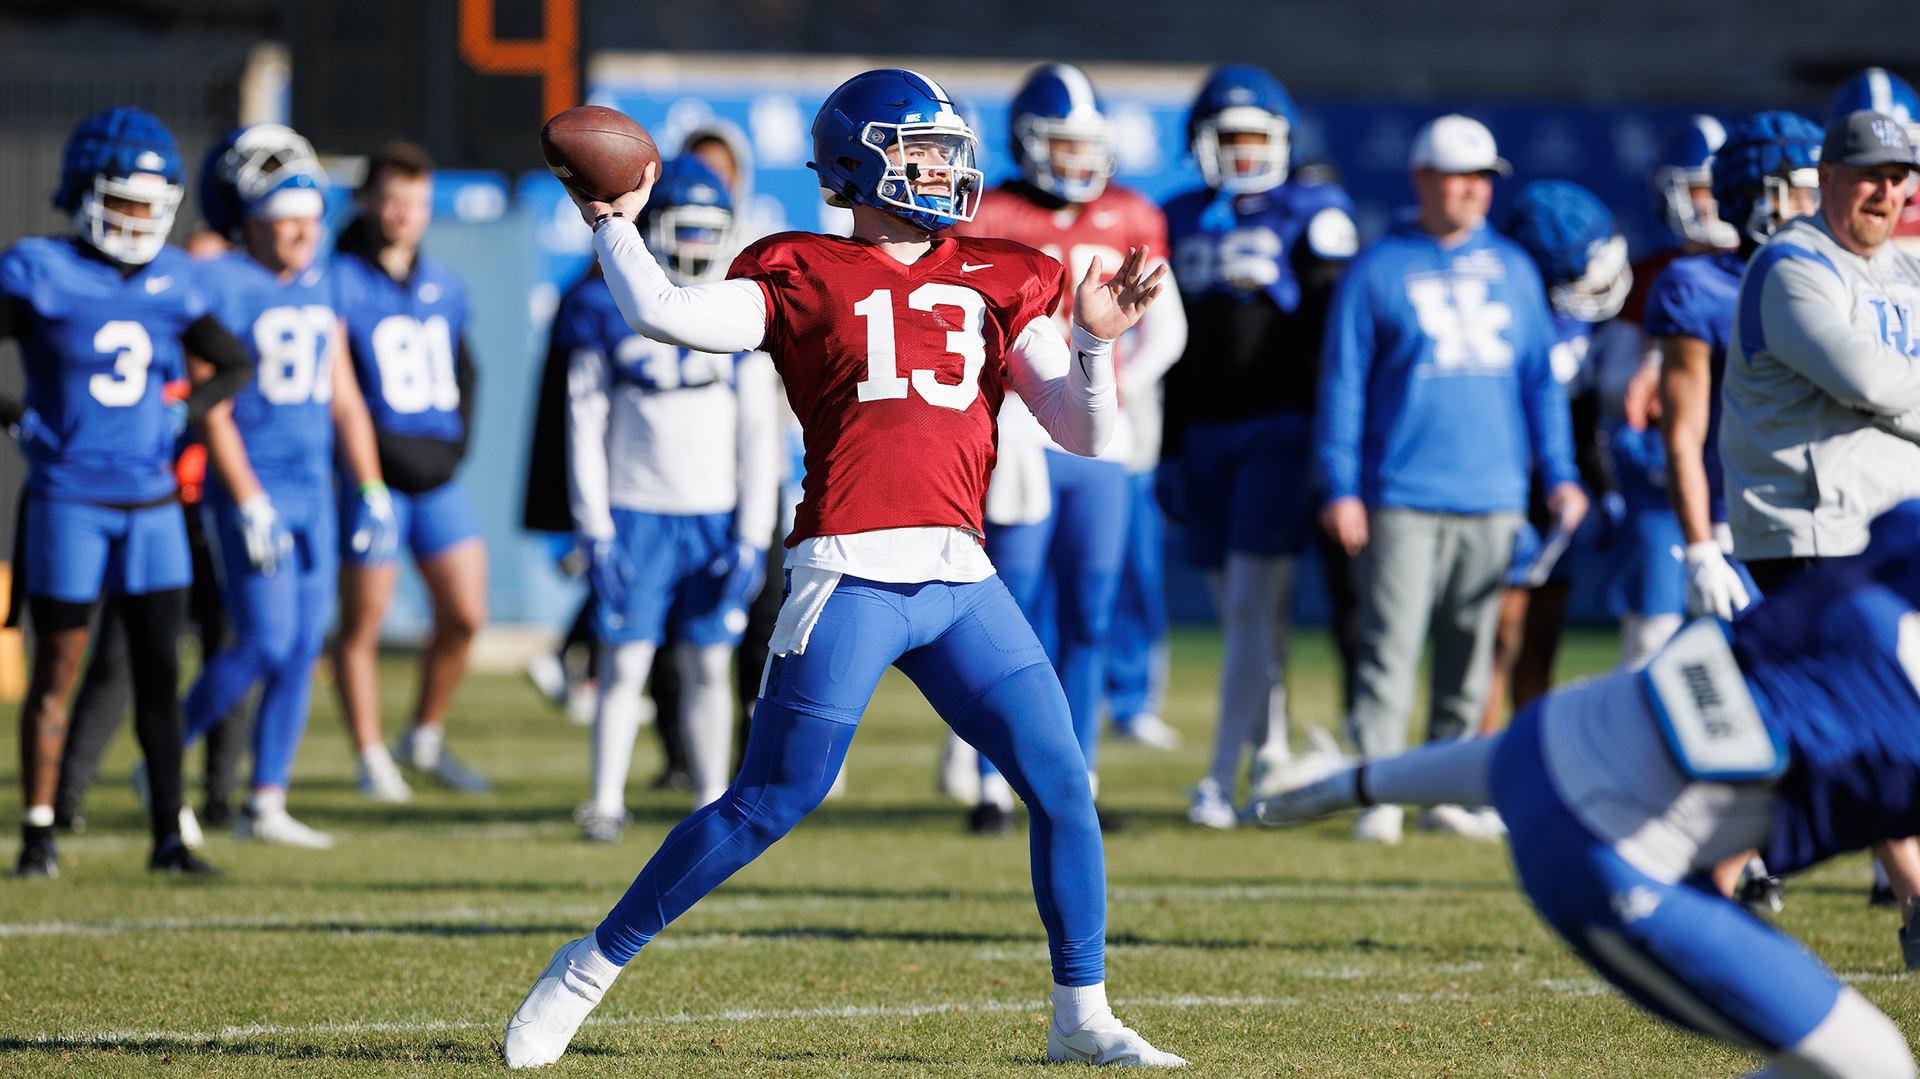 Stoops Believes Leary Will Be 'Natural Leader' for Cats